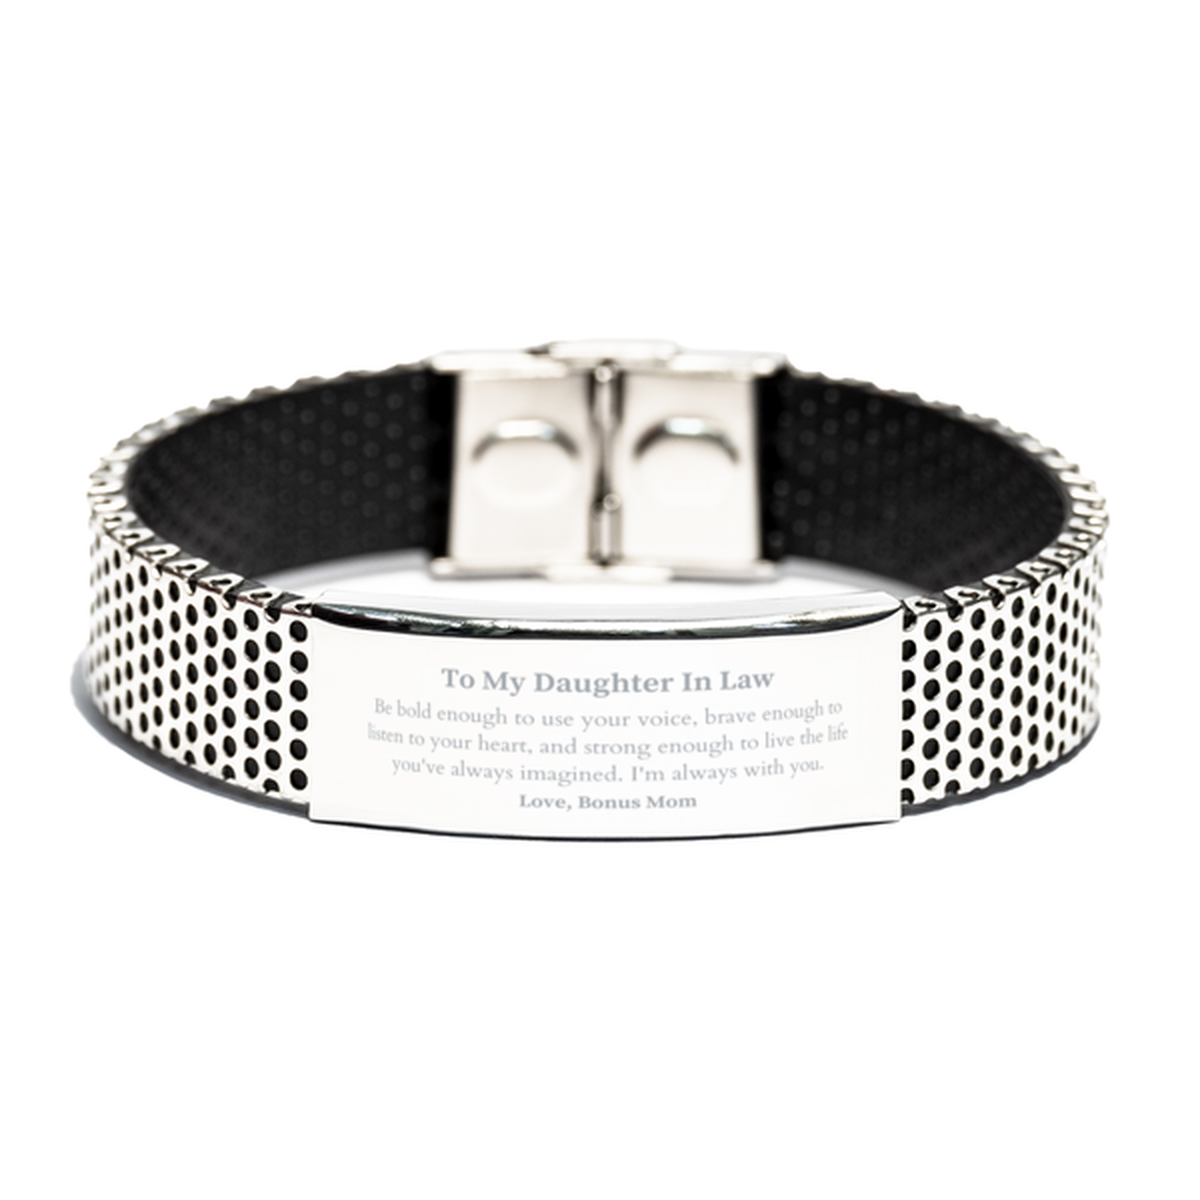 Keepsake Daughter In Law Stainless Steel Bracelet Gift Idea Graduation Christmas Birthday Daughter In Law from Bonus Mom, Daughter In Law Be bold enough to use your voice, brave enough to listen to your heart. Love, Bonus Mom